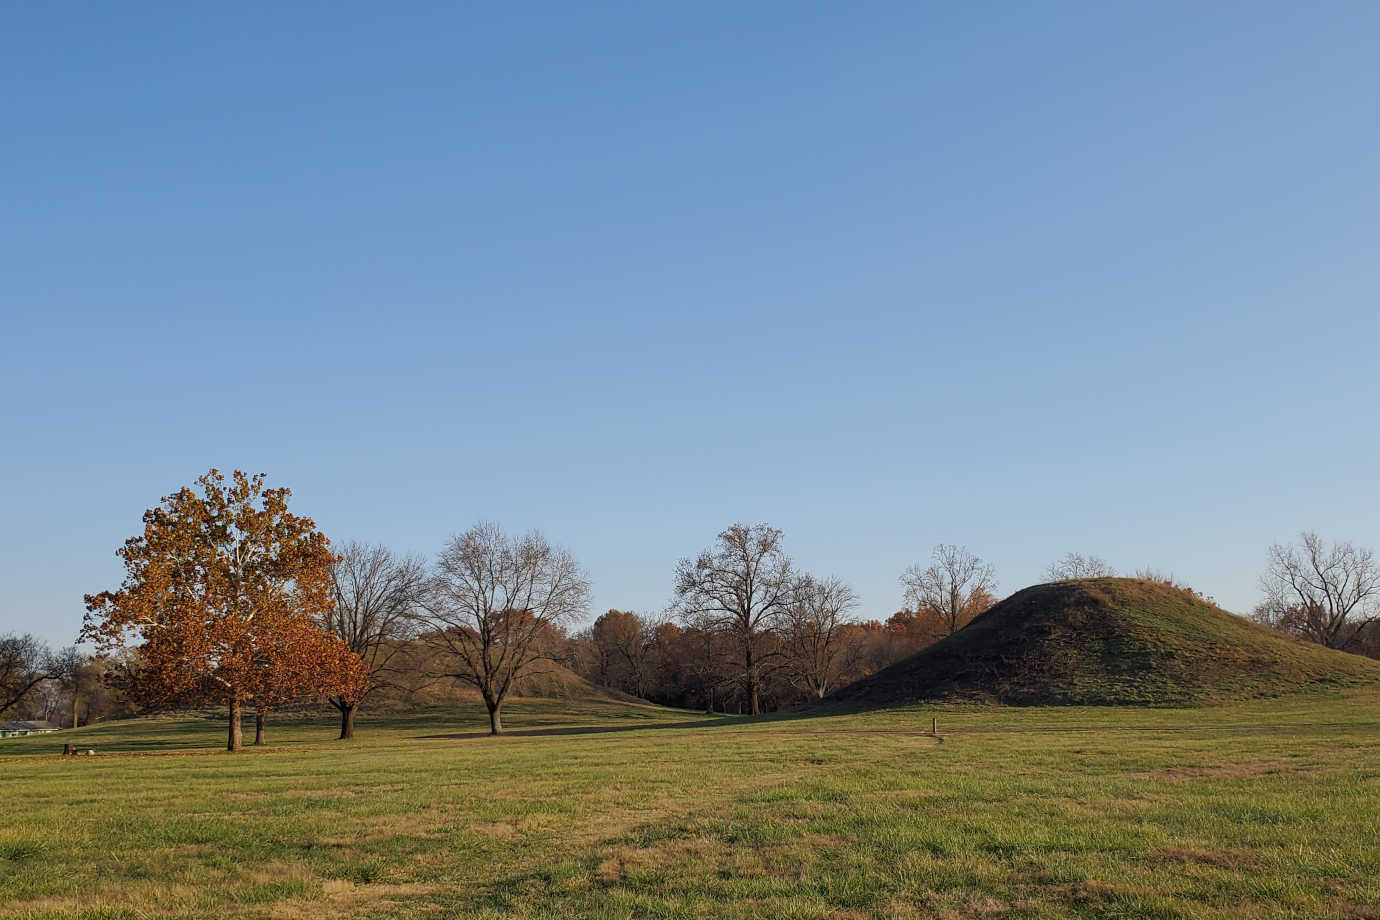 The twin mounds at Cahokia Mounds State Historic Site. Image courtesy of Cahokia Mounds Museum Society.